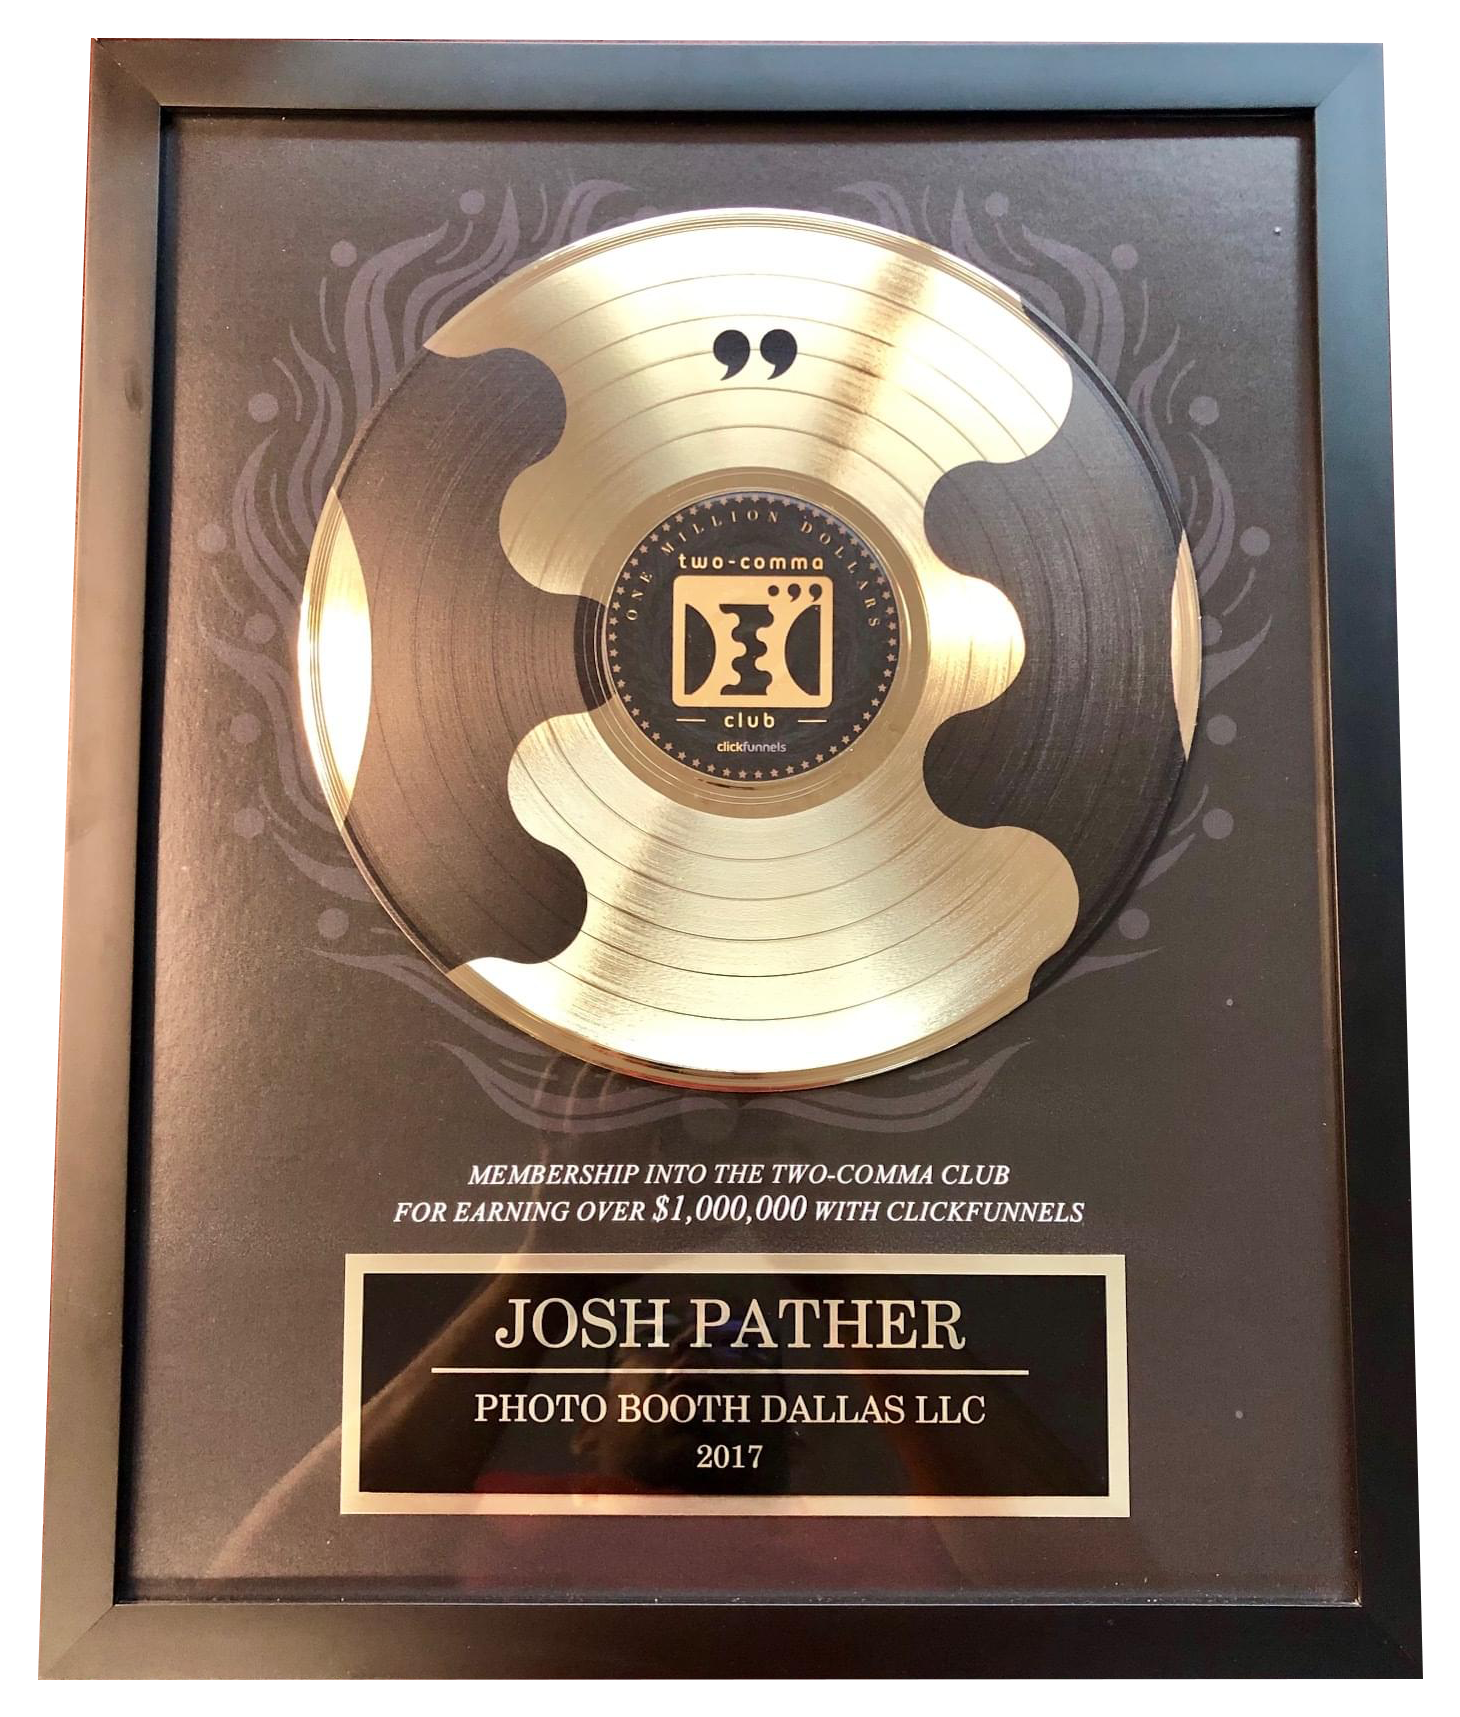 A Gold And Black Record In A Frame